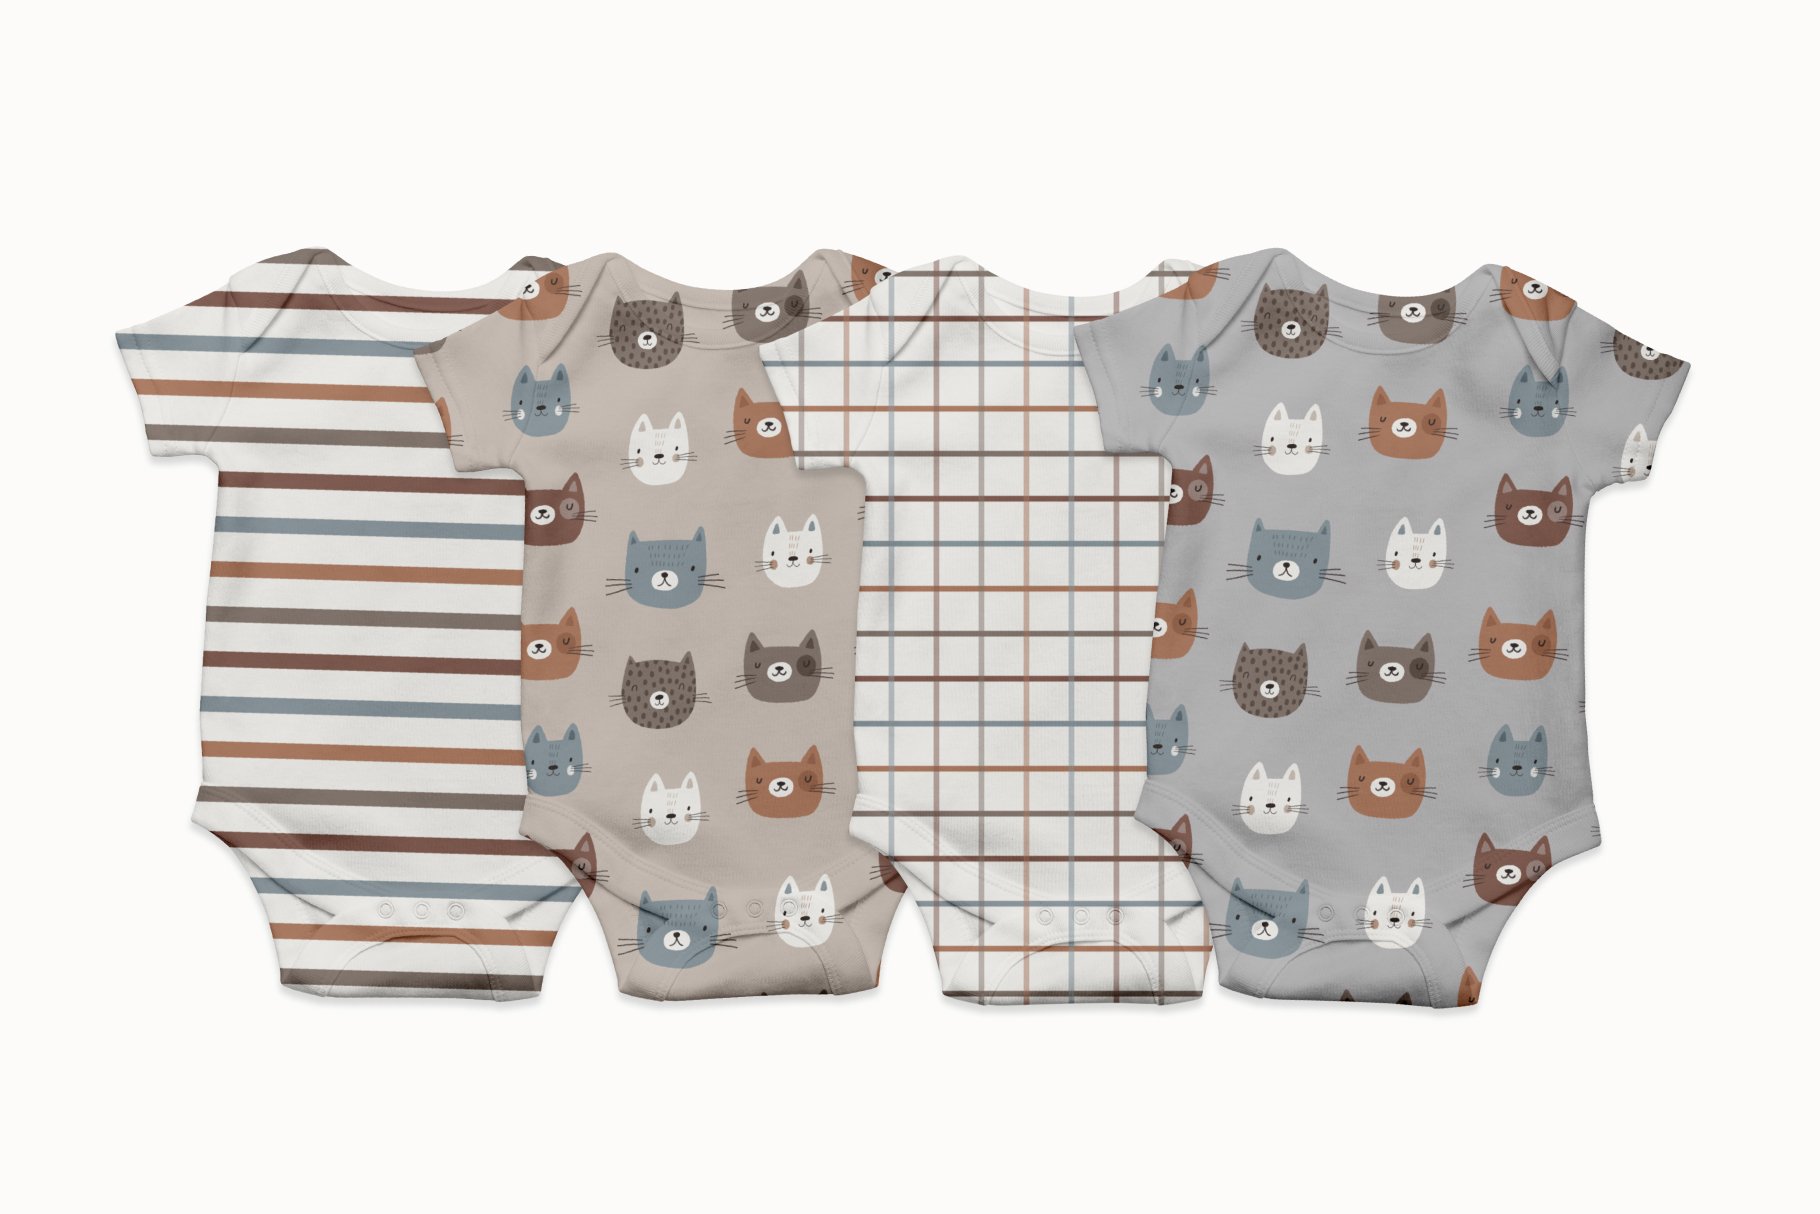 Diverse of cats prints on the baby clothes.